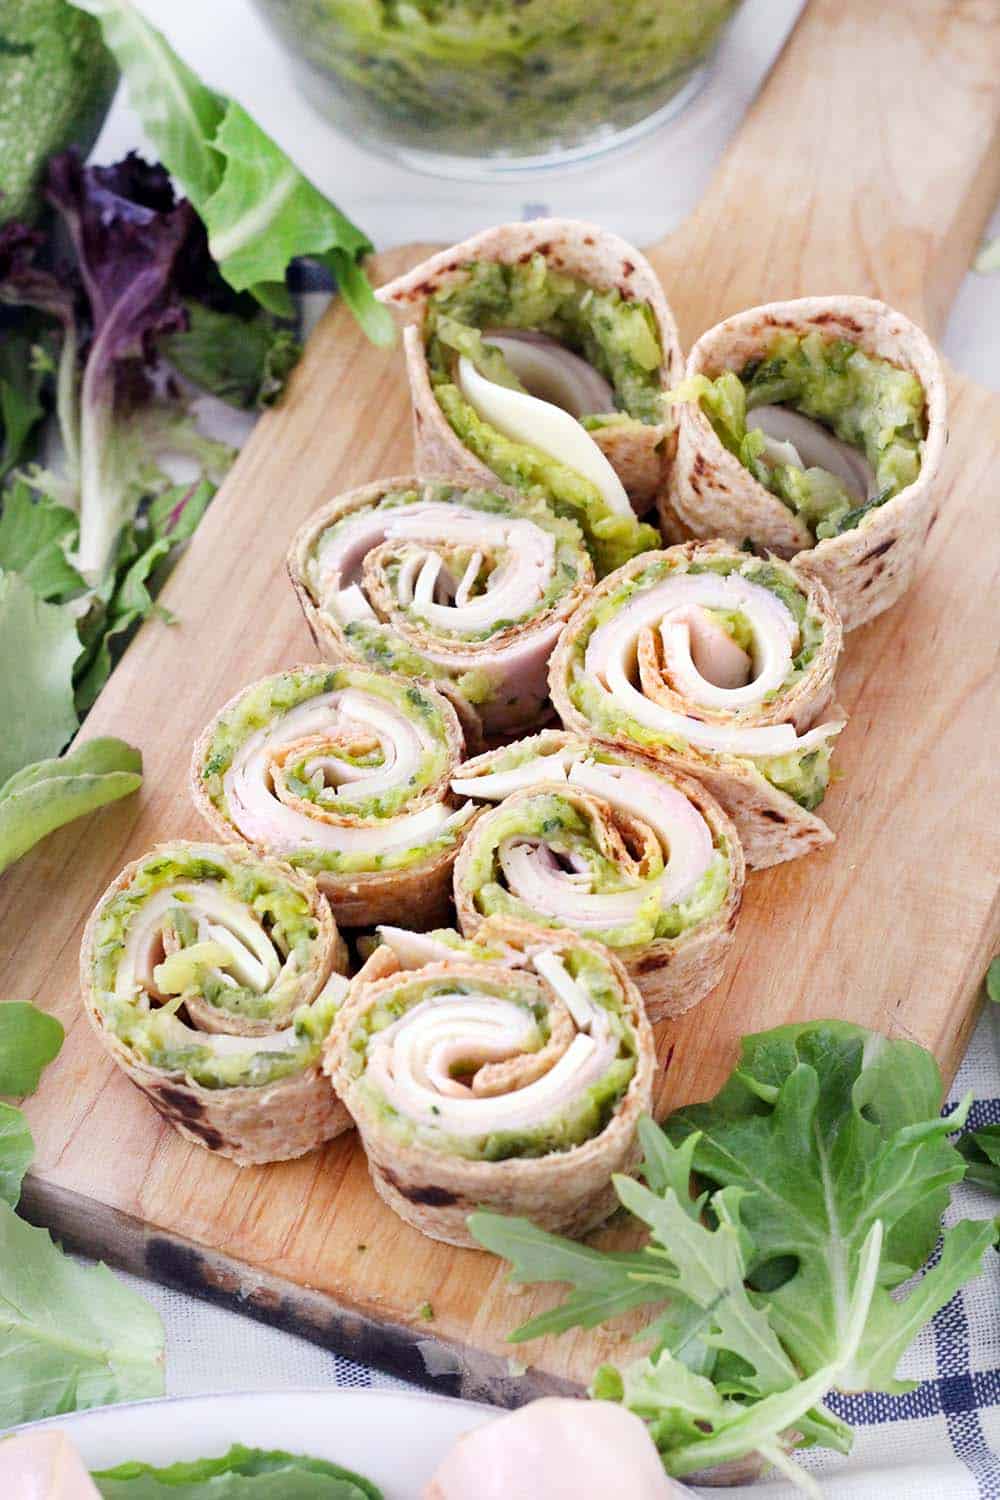 These Turkey Roll-Ups are spread with yummy, veggie-packed Zucchini Butter instead of mayo for an easy meal-prep sandwich for lunches all week long! Great for back-to-school and super kid friendly. Use any leftover zucchini butter in an omelette, as a dip, or to stuff chicken breasts.